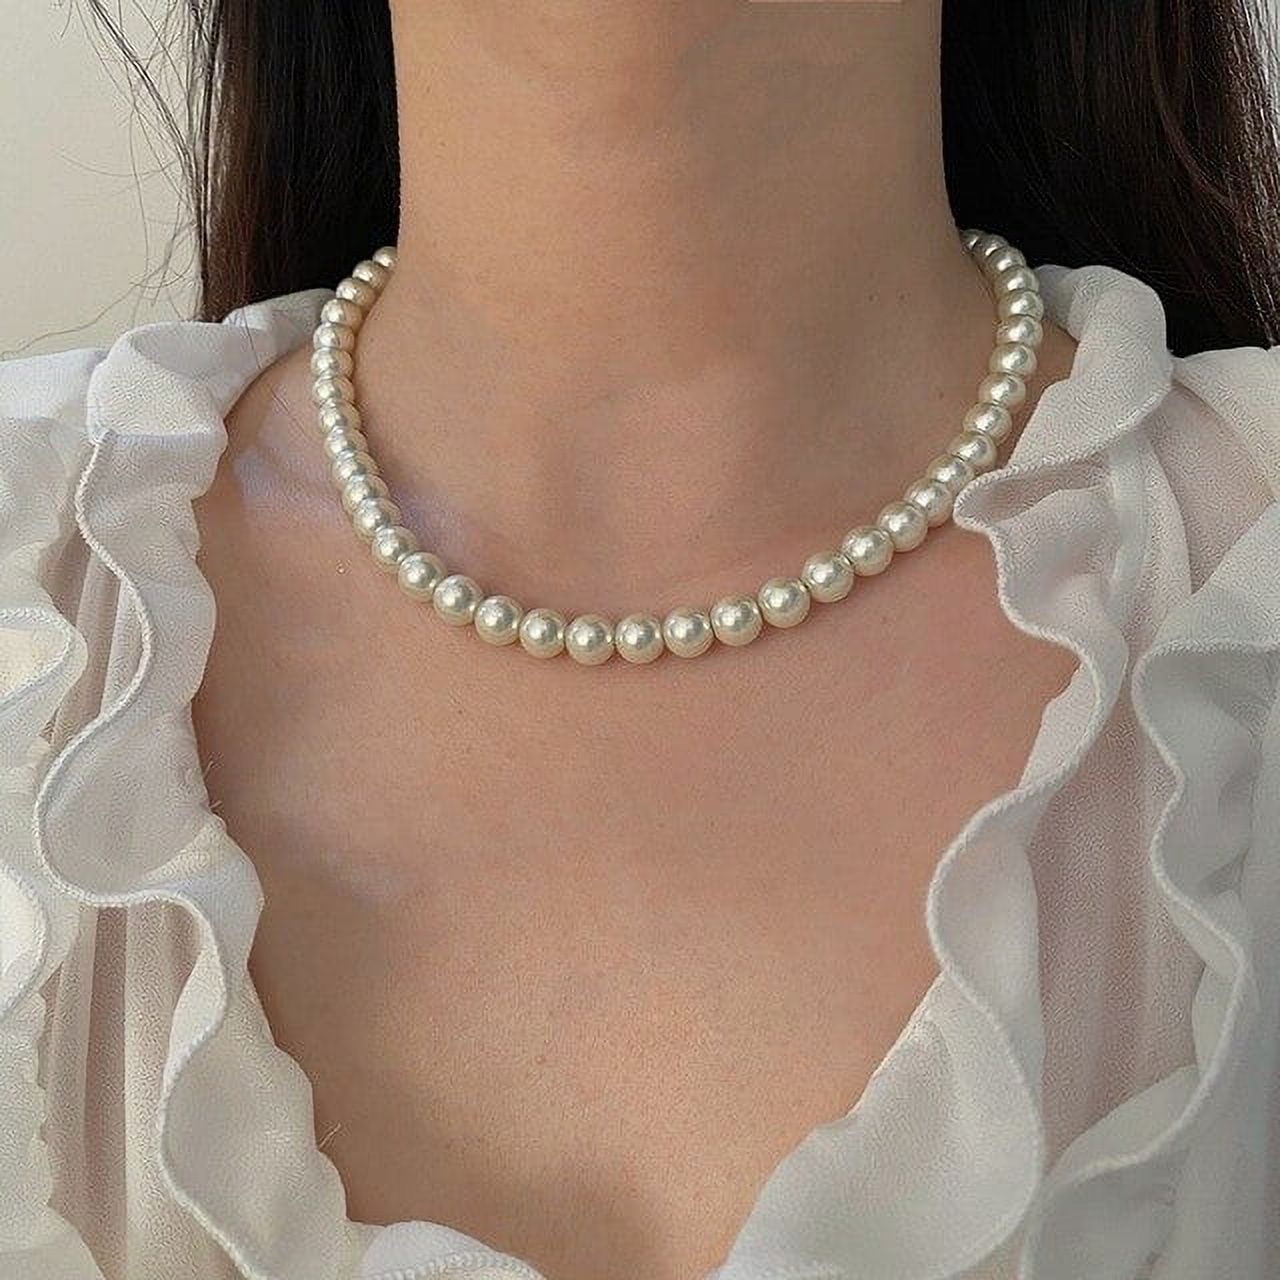 QWZNDZGR 2021 Trend Elegant Jewelry Wedding Natural Pearl Necklace For  Women Fashion White Imitation Pearl Choker Necklace